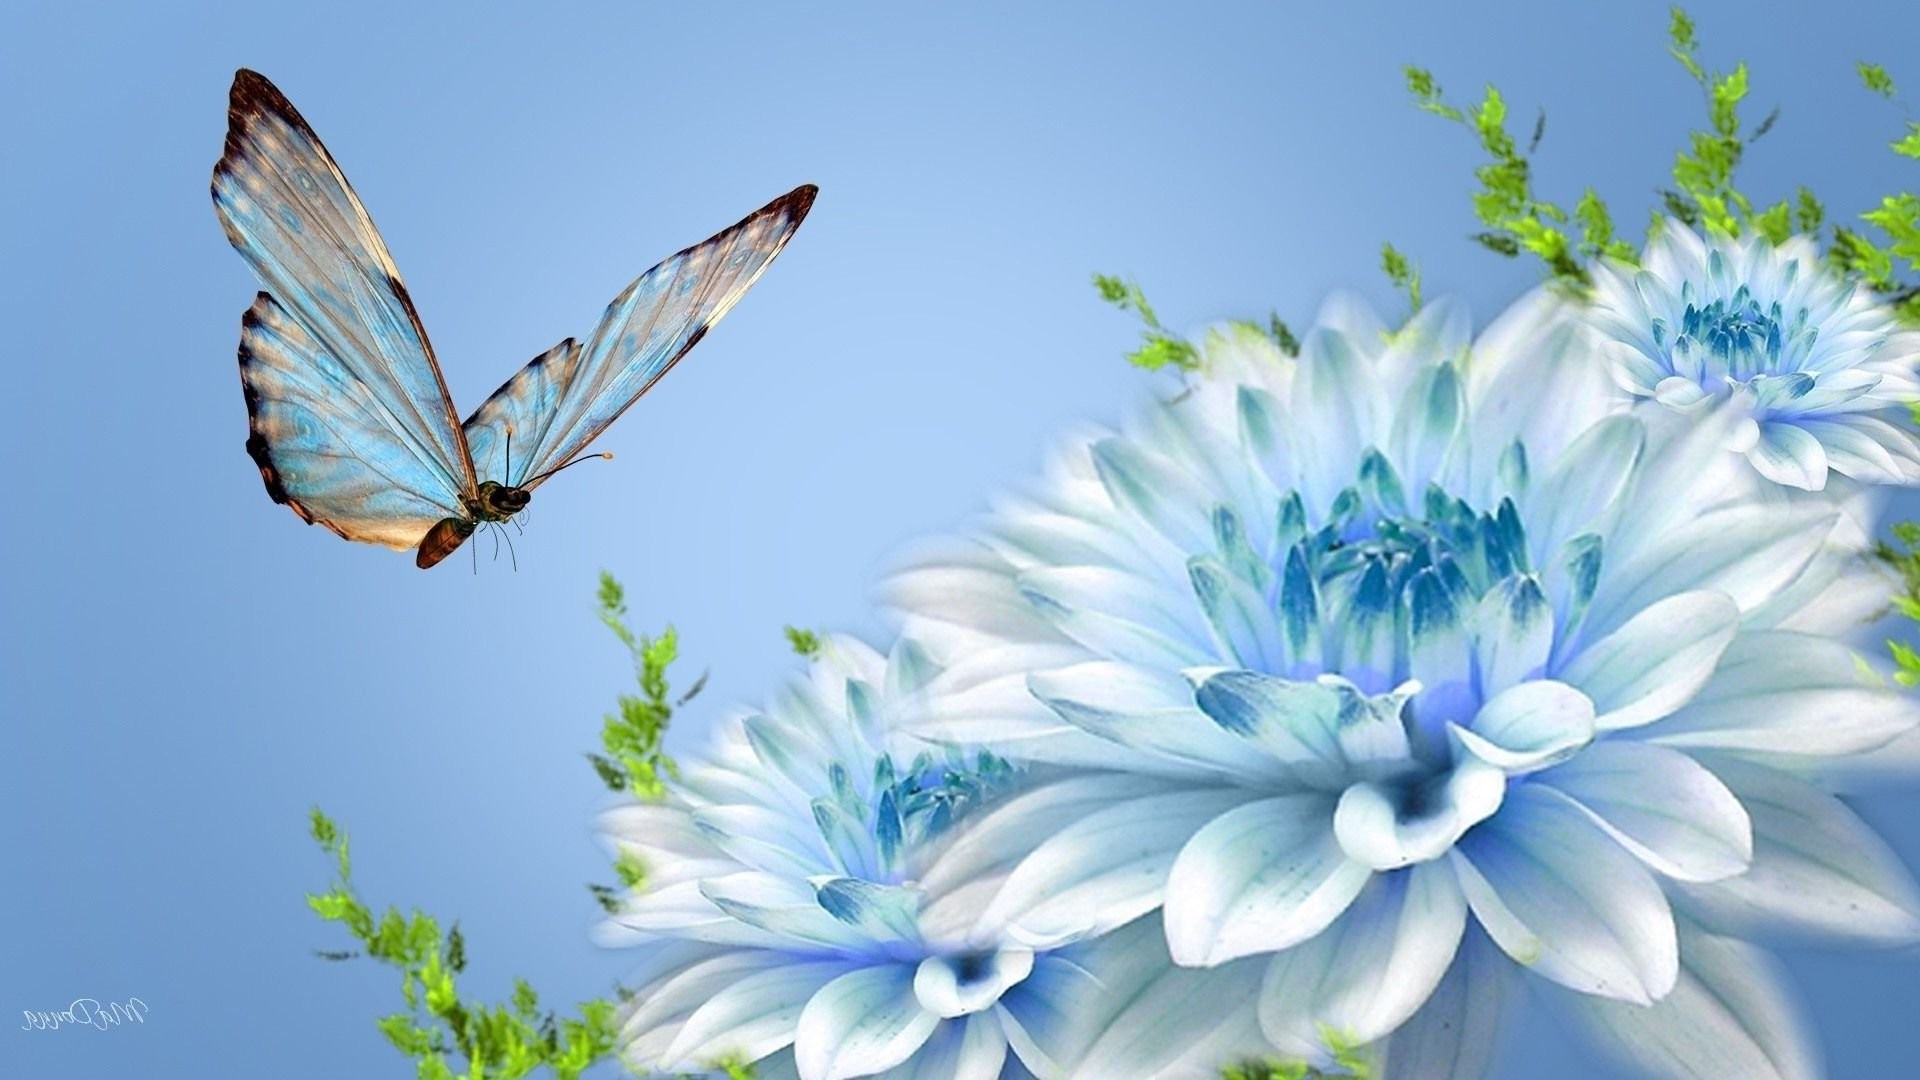 Beautiful Pictures Of Flowers And Butterflies Birds - Blue Butterfly On Flower - HD Wallpaper 